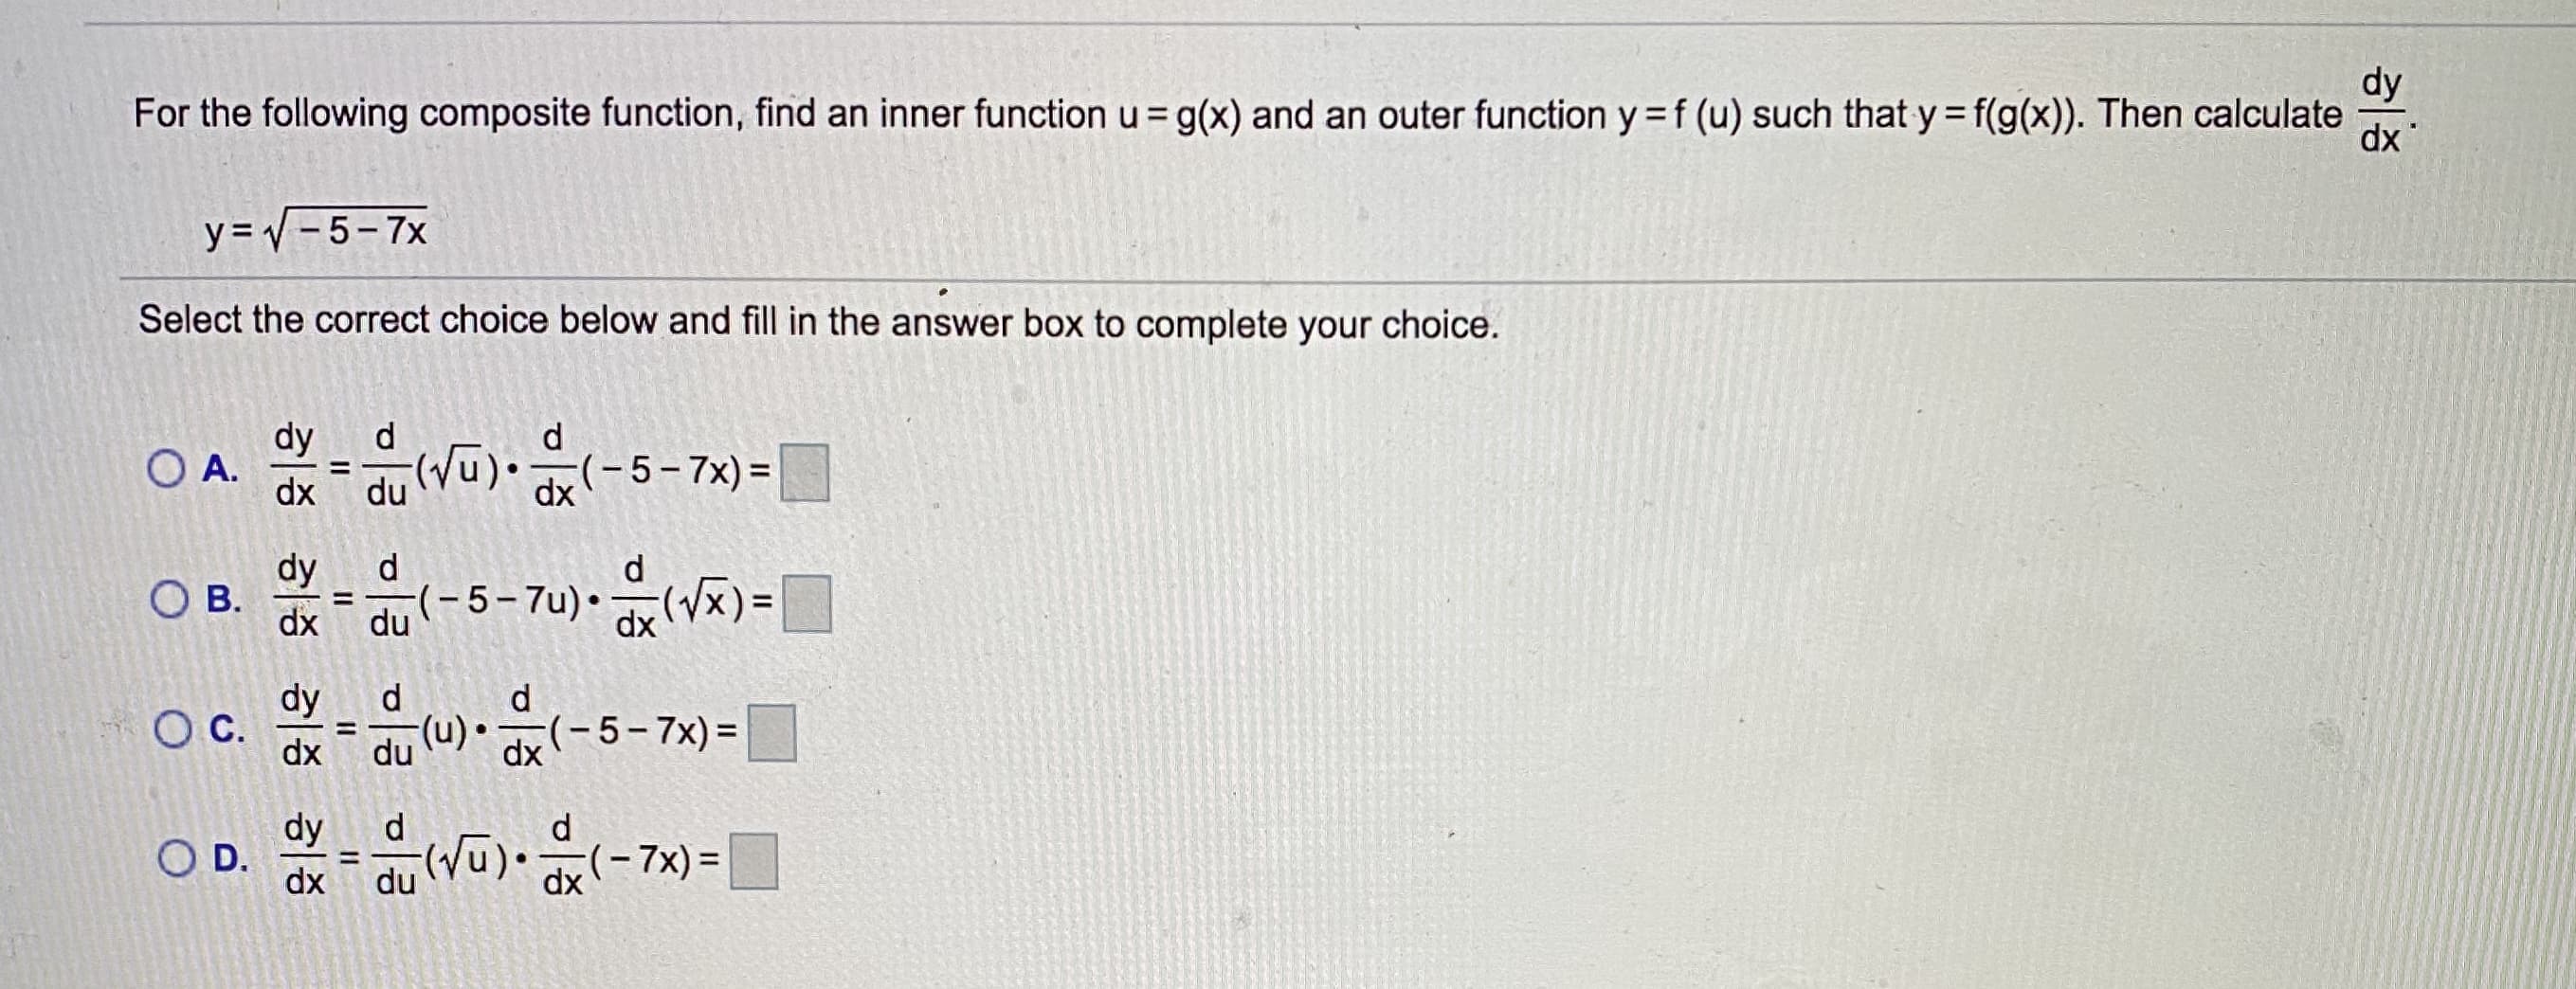 dy
For the following composite function, find an inner function u = g(x) and an outer function y =f(u) such that y= f(g(x)). Then calculate
dx
y = V - 5-7x
Select the correct choice below and fill in the answer box to complete your choice.
O A. -Vu).-5-7x) =|
dy
dx -5-7x) =
%3D
dx
dy
О в.
du(-5-7u)
•(Vx)=|
%3D
dx
dx
dy
Oc.
dx
d.
(- 5-7x) =
du
dx
dy
d.
O D.
dx
%3D
%3D
du
dx
